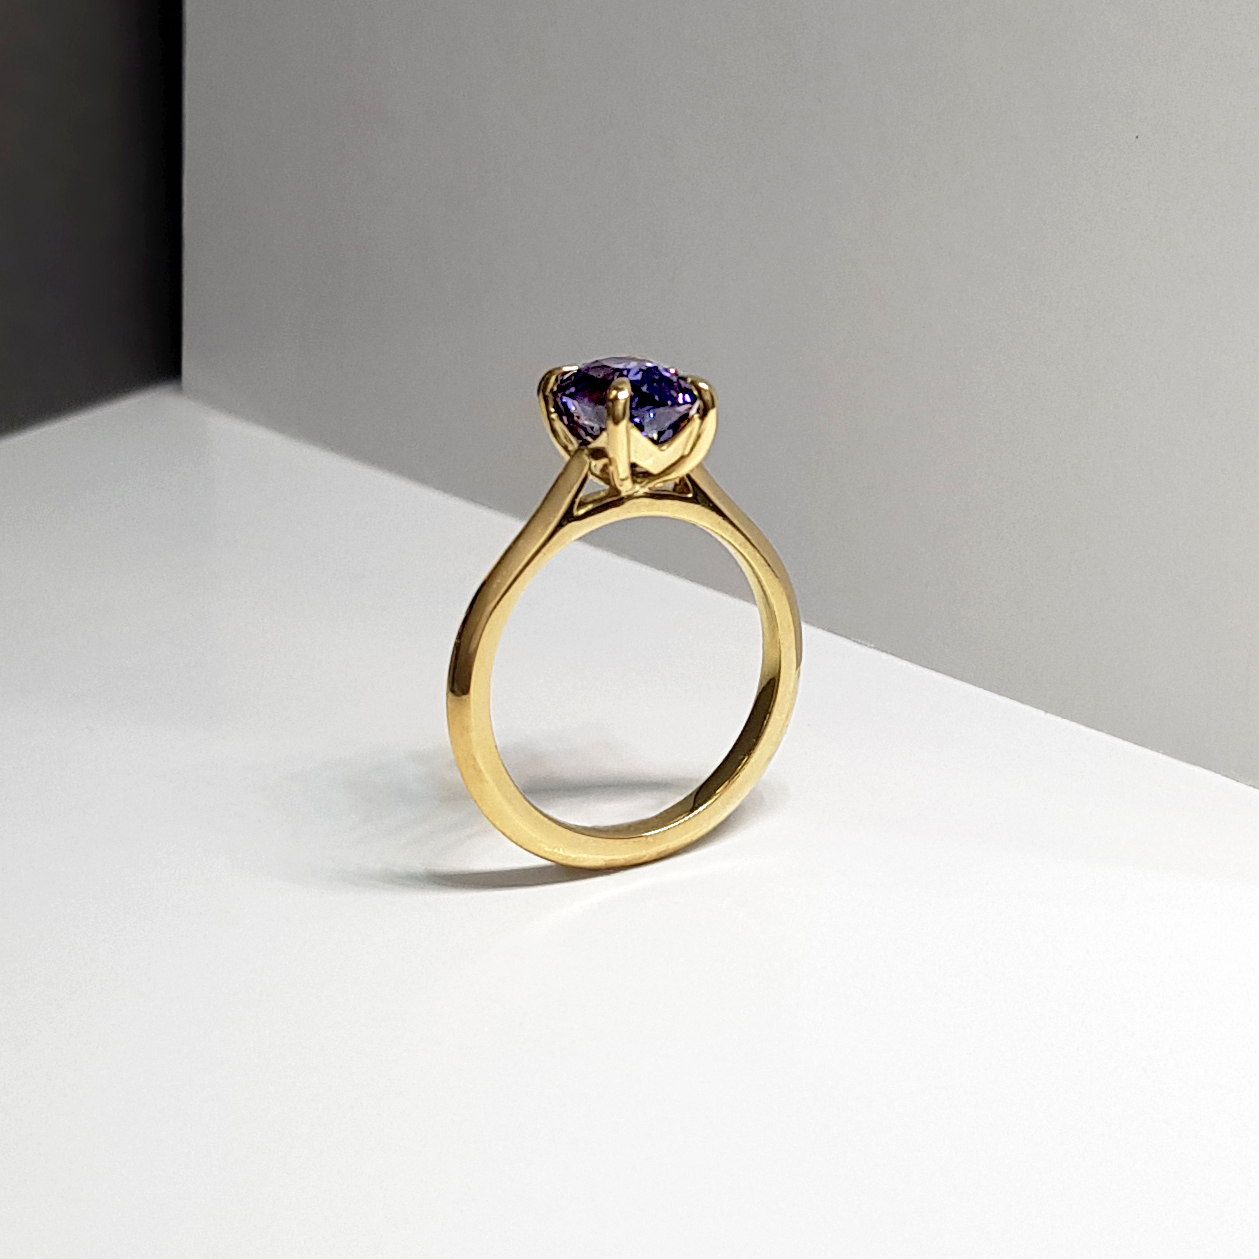 a single stone natural purple sapphire and gold engagement ring, standing upright on a white background